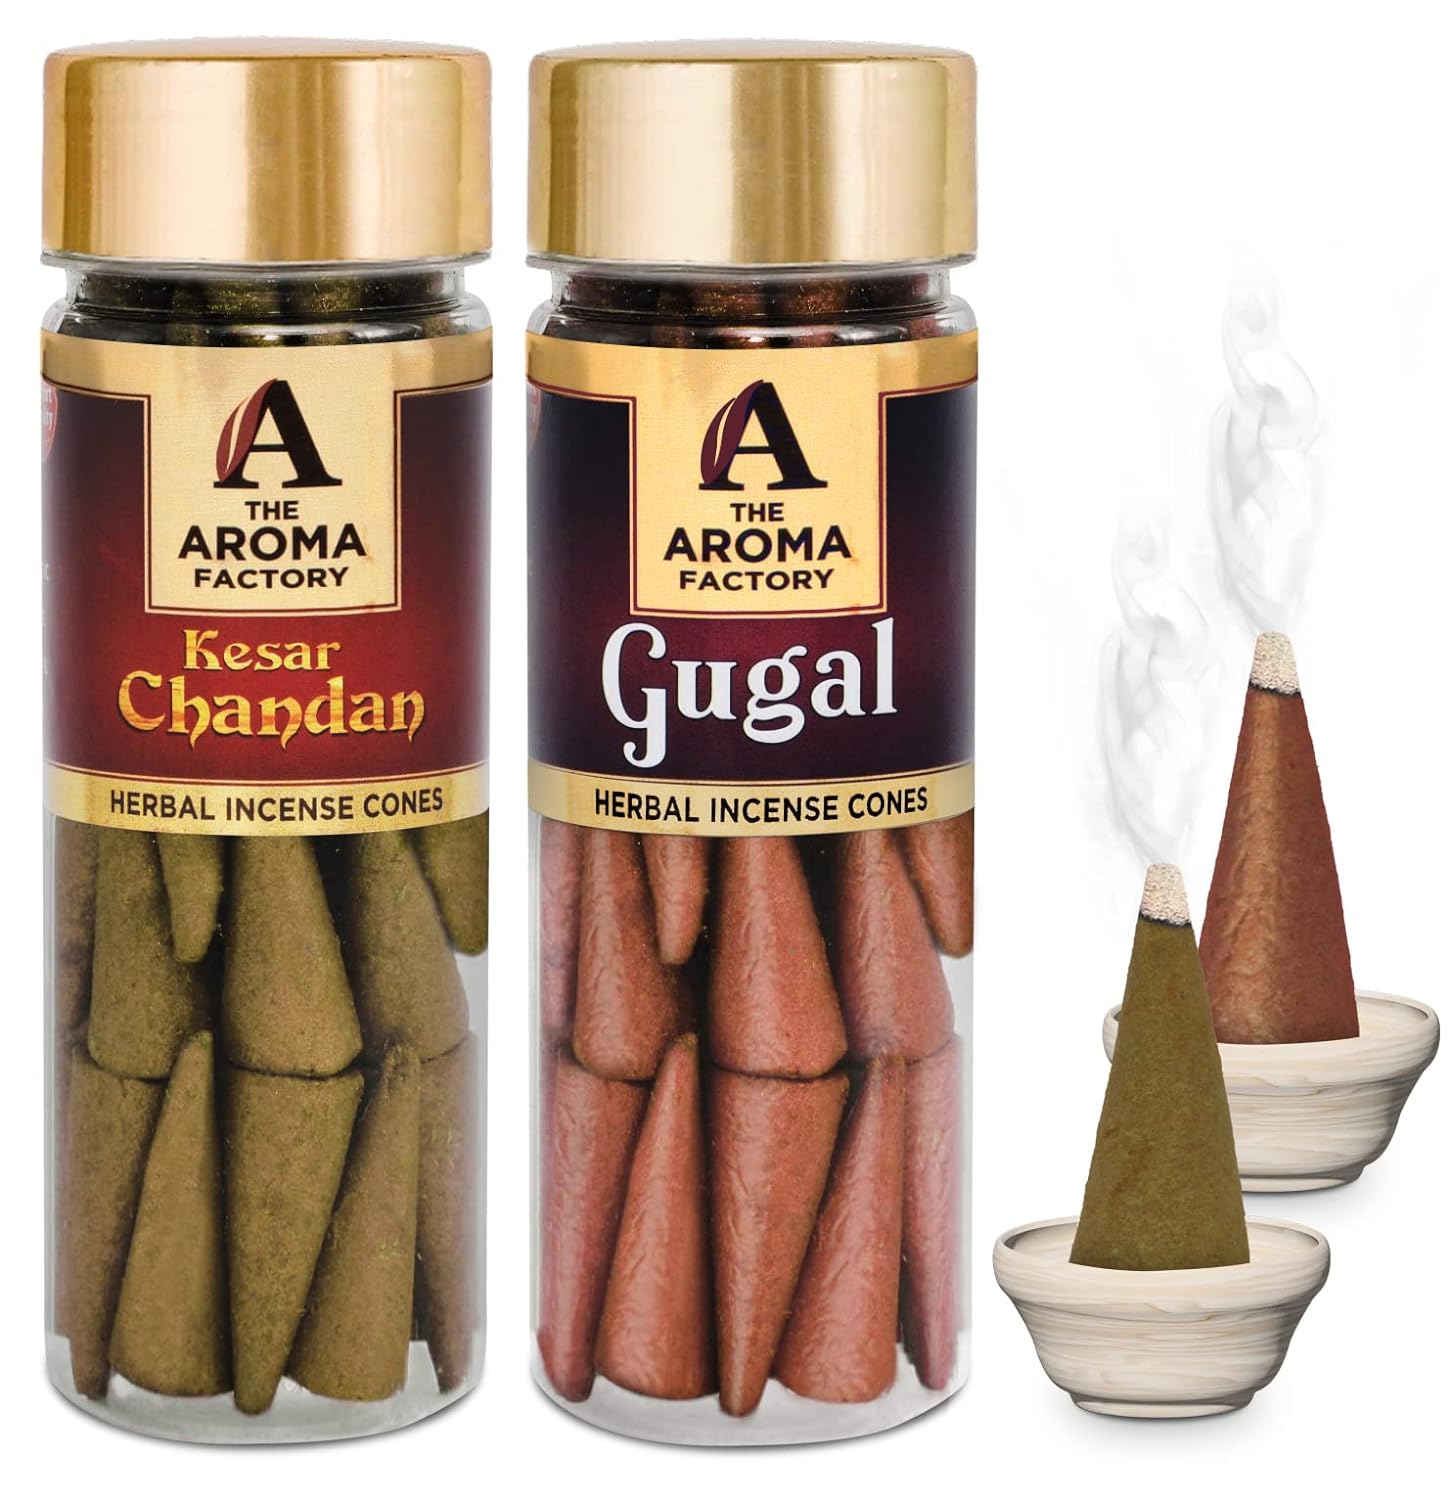 The Aroma Factory Incense Dhoop Cone for Pooja, Kesar Chandan & Gugal (100% Herbal & 0% Charcoal) 2 Bottles x 30 Cones